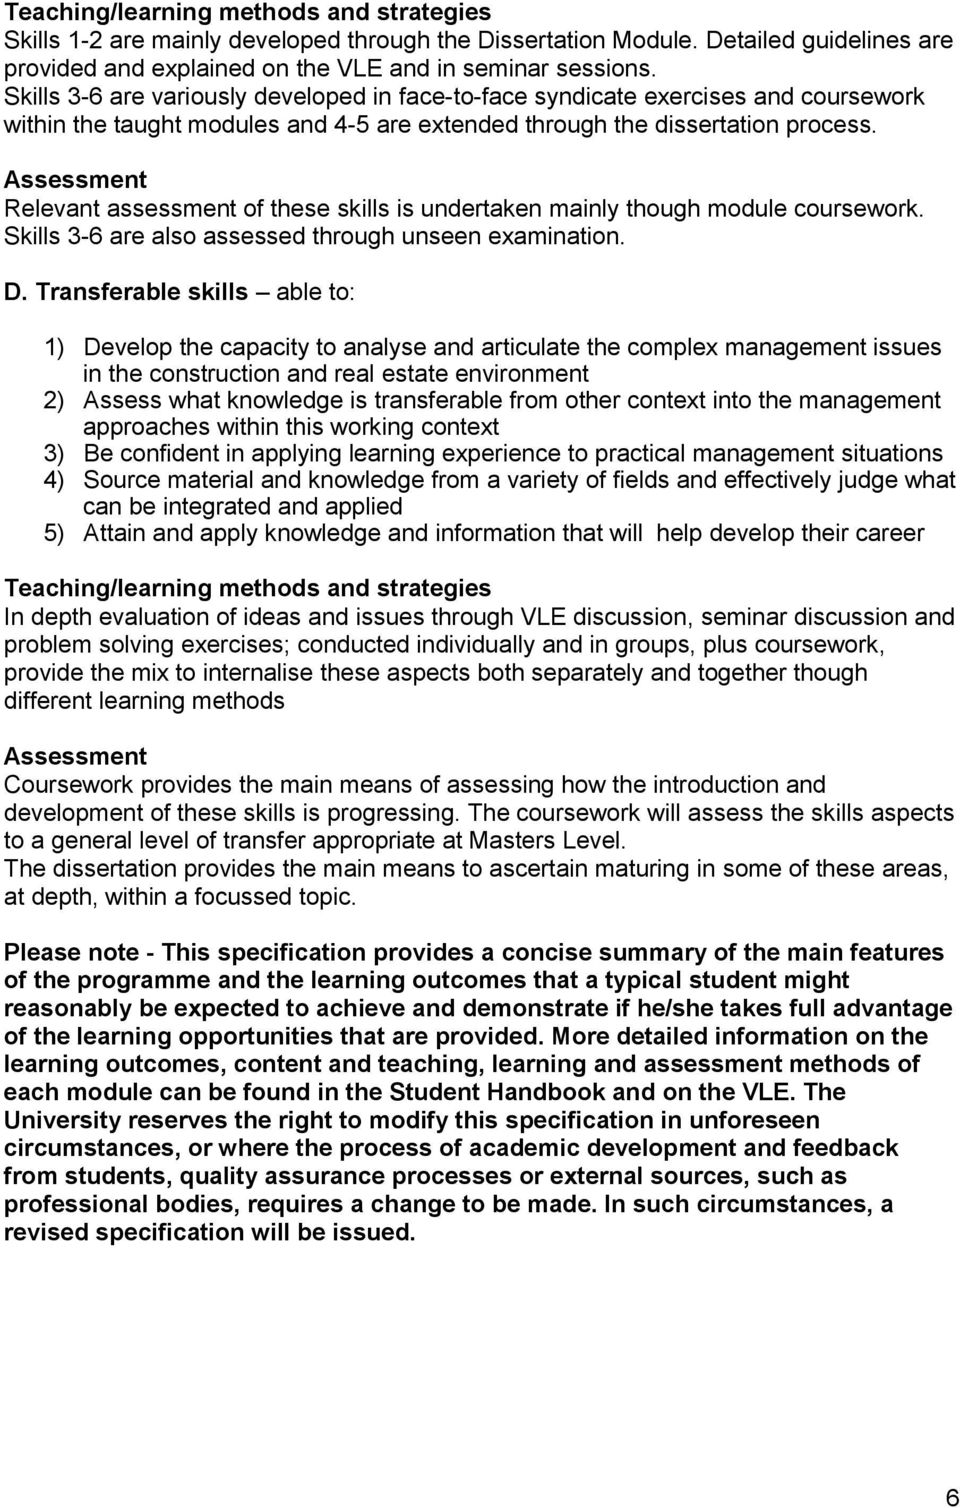 Relevant assessment of these skills is undertaken mainly though module coursework. Skills 3-6 are also assessed through unseen examination. D.